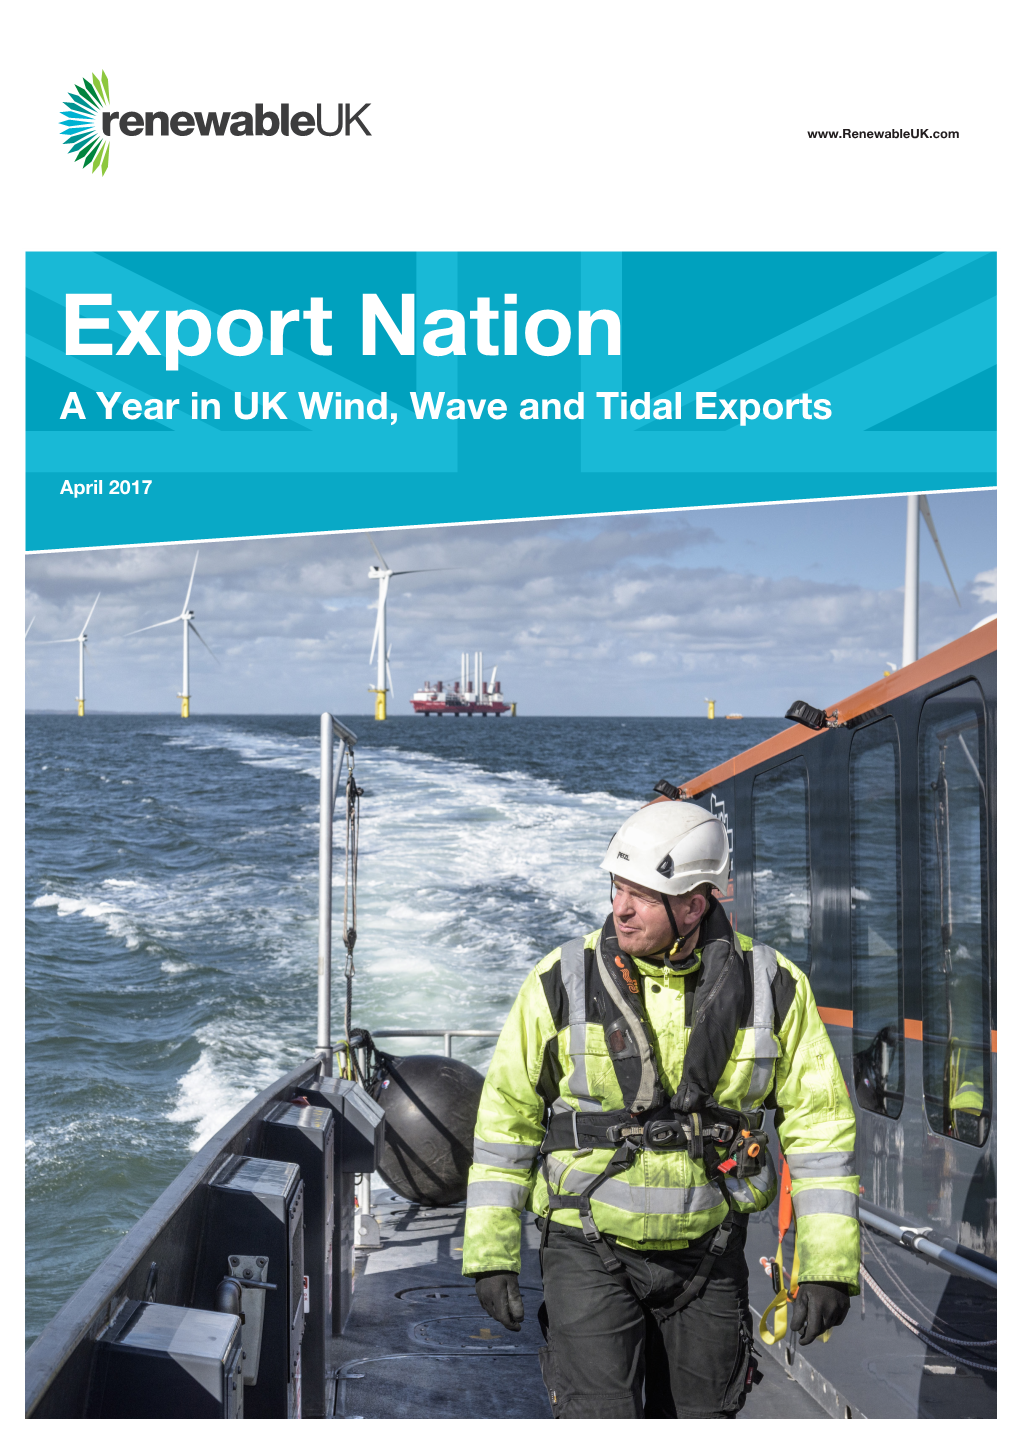 Export Nation a Year in UK Wind, Wave and Tidal Exports